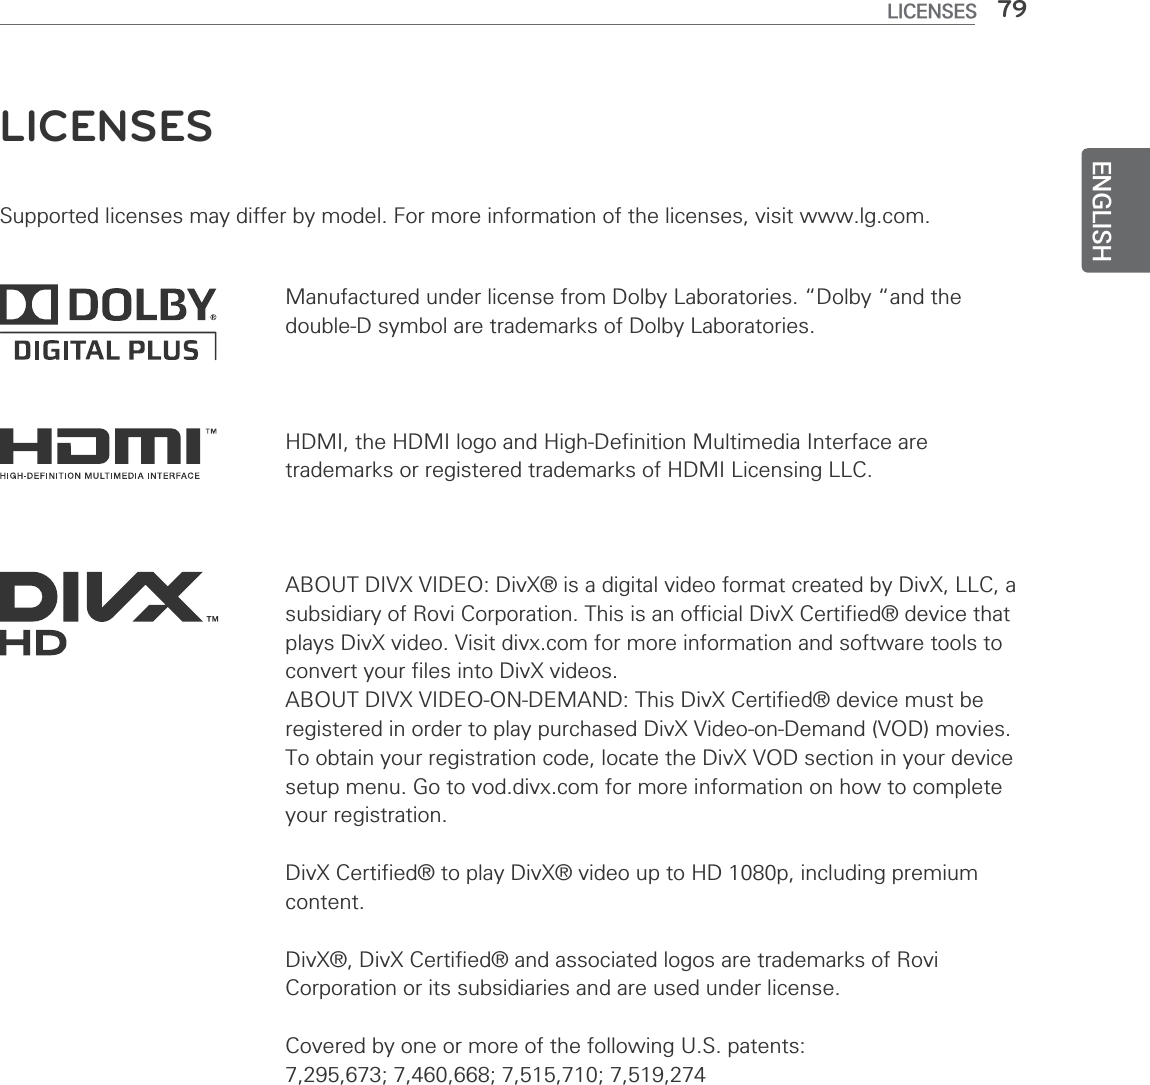 ENGLISH79LICENSESLICENSESSupported licenses may differ by model. For more information of the licenses, visit www.lg.com.HDMI, the HDMI logo and High-Definition Multimedia Interface are trademarks or registered trademarks of HDMI Licensing LLC.ABOUT DIVX VIDEO: DivX® is a digital video format created by DivX, LLC, a subsidiary of Rovi Corporation. This is an official DivX Certified® device that plays DivX video. Visit divx.com for more information and software tools to convert your files into DivX videos.ABOUT DIVX VIDEO-ON-DEMAND: This DivX Certified® device must be registered in order to play purchased DivX Video-on-Demand (VOD) movies. To obtain your registration code, locate the DivX VOD section in your device setup menu. Go to vod.divx.com for more information on how to complete your registration.DivX Certified® to play DivX® video up to HD 1080p, including premium content.DivX®, DivX Certified® and associated logos are trademarks of Rovi Corporation or its subsidiaries and are used under license.Covered by one or more of the following U.S. patents: 7,295,673; 7,460,668; 7,515,710; 7,519,274Manufactured under license from Dolby Laboratories. “Dolby “and the double-D symbol are trademarks of Dolby Laboratories.